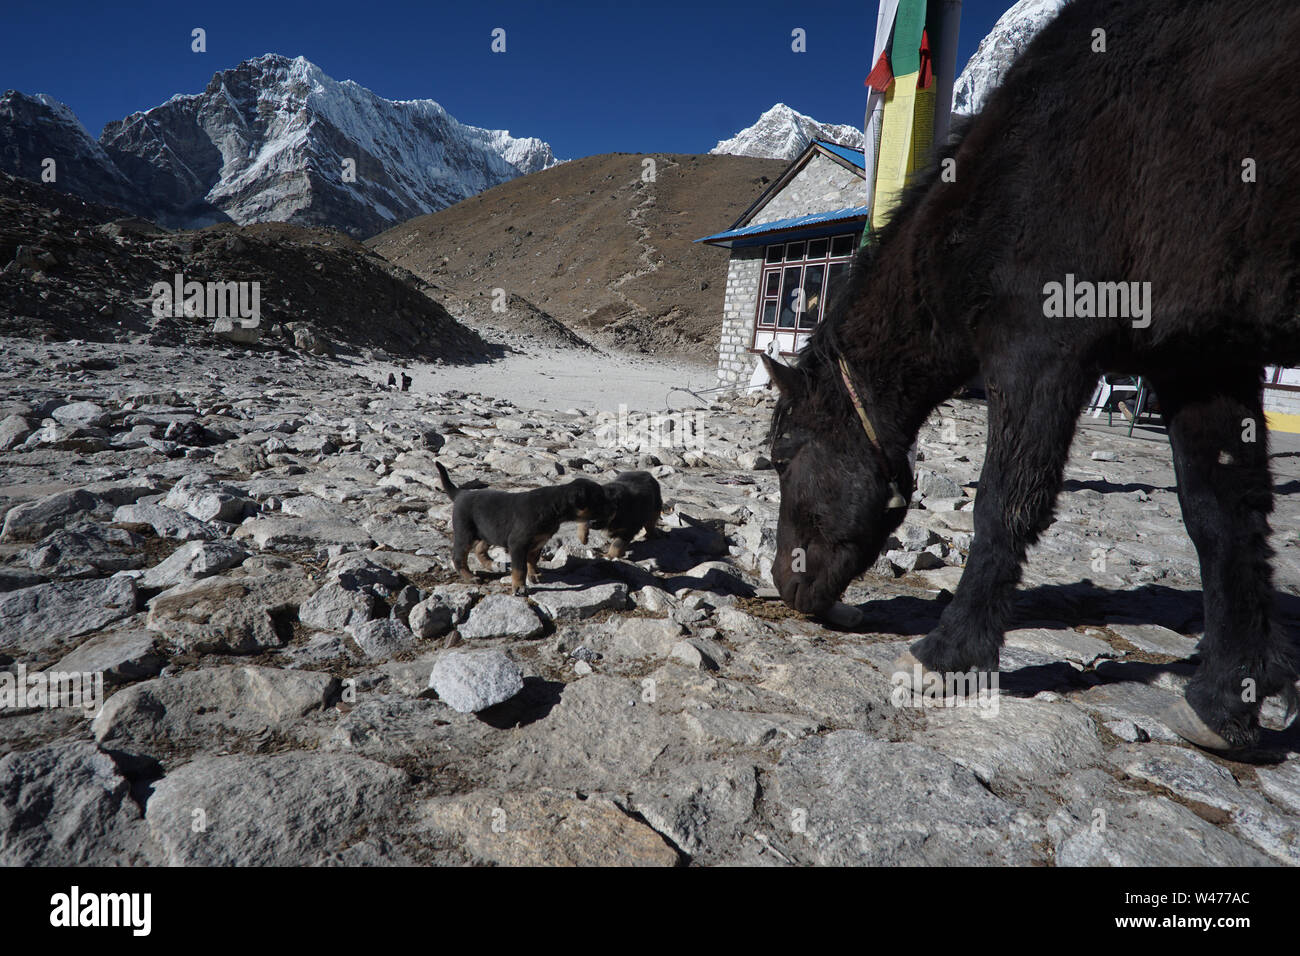 Puppies and a horse in Gorak Shep, the Everest region, Nepal Stock Photo